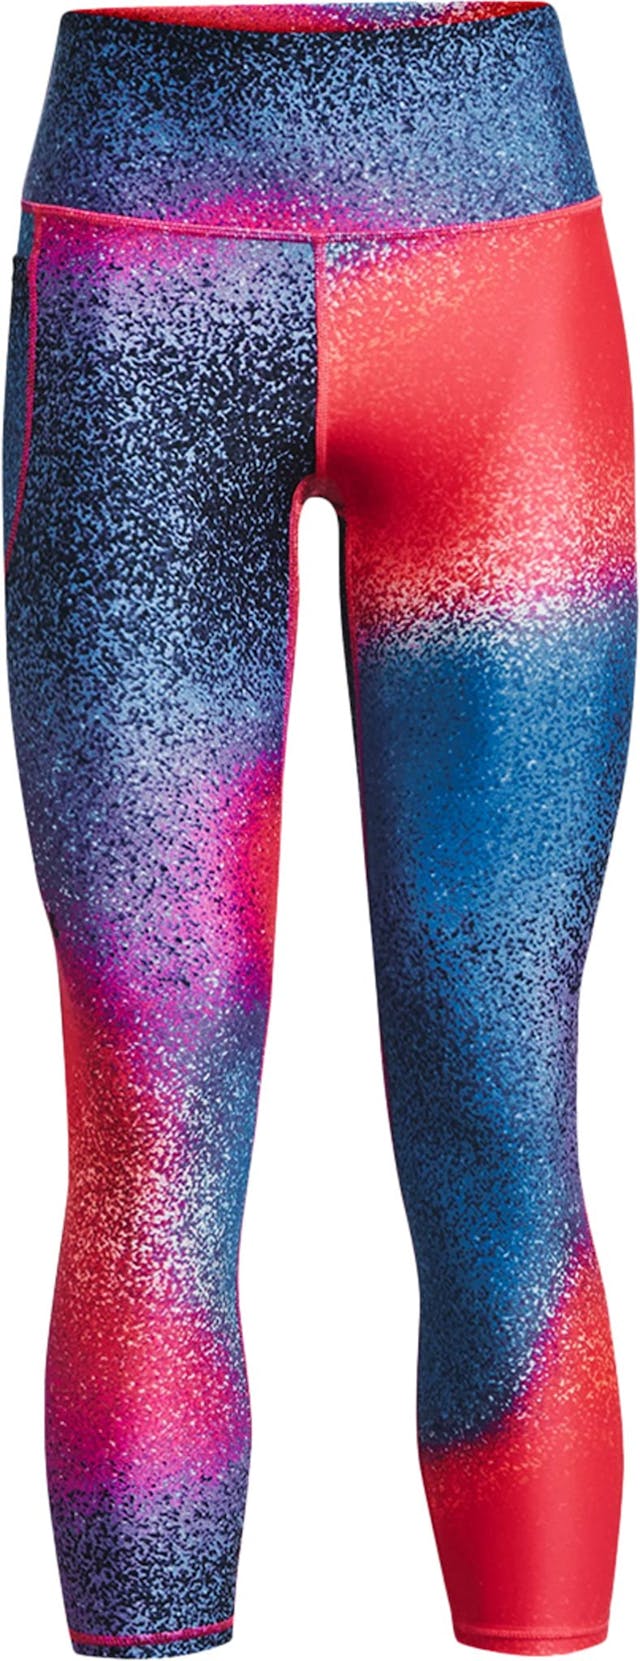 Product image for HeatGear Armour No-Slip Waistband Printed Ankle Leggings - Women's